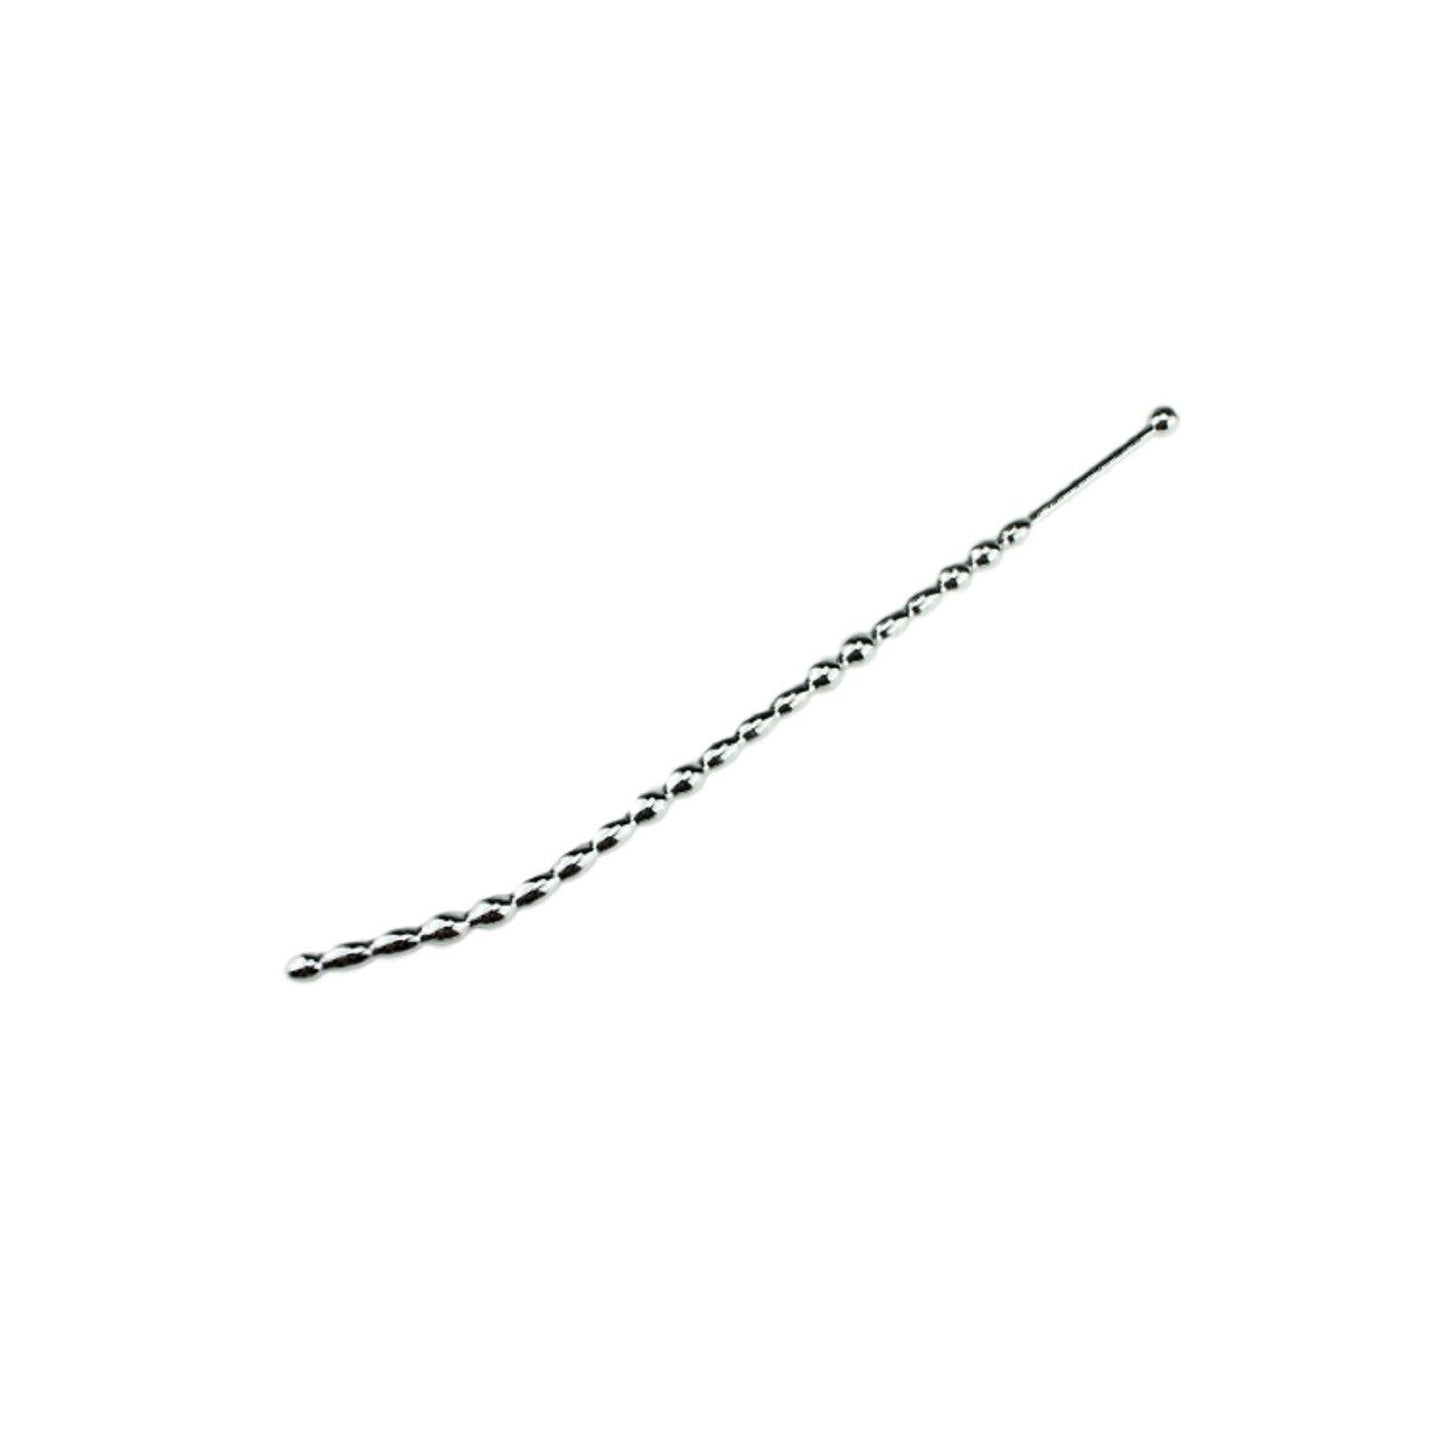 Extra Long Urethral Sound Ribbed Penis Plug Cock Steel Catheter Rod Sex Toy New